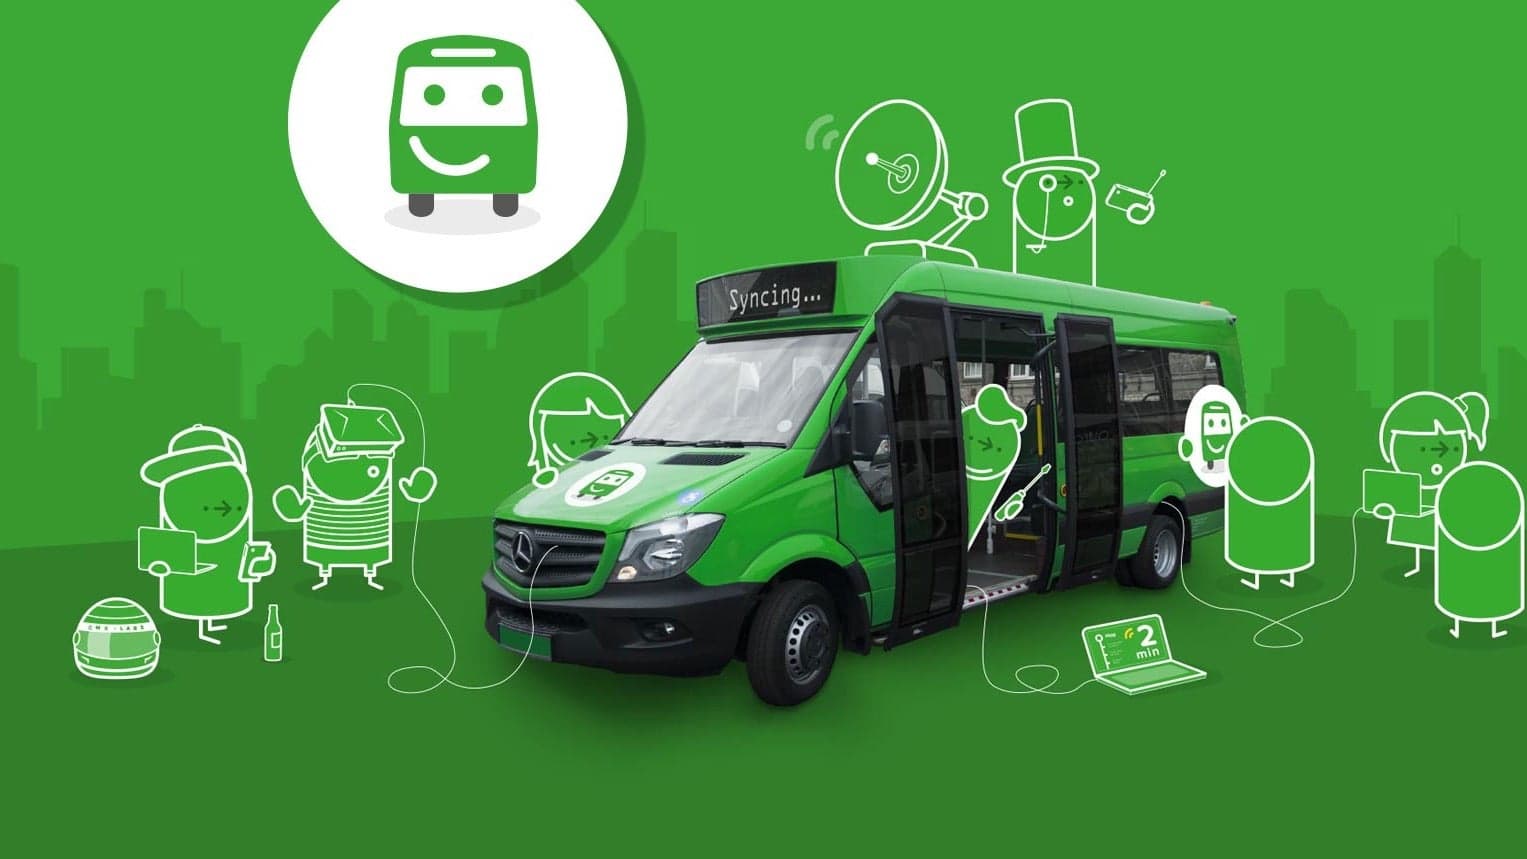 Transit App Citymapper Will Go Head-to-Head with Uber in London